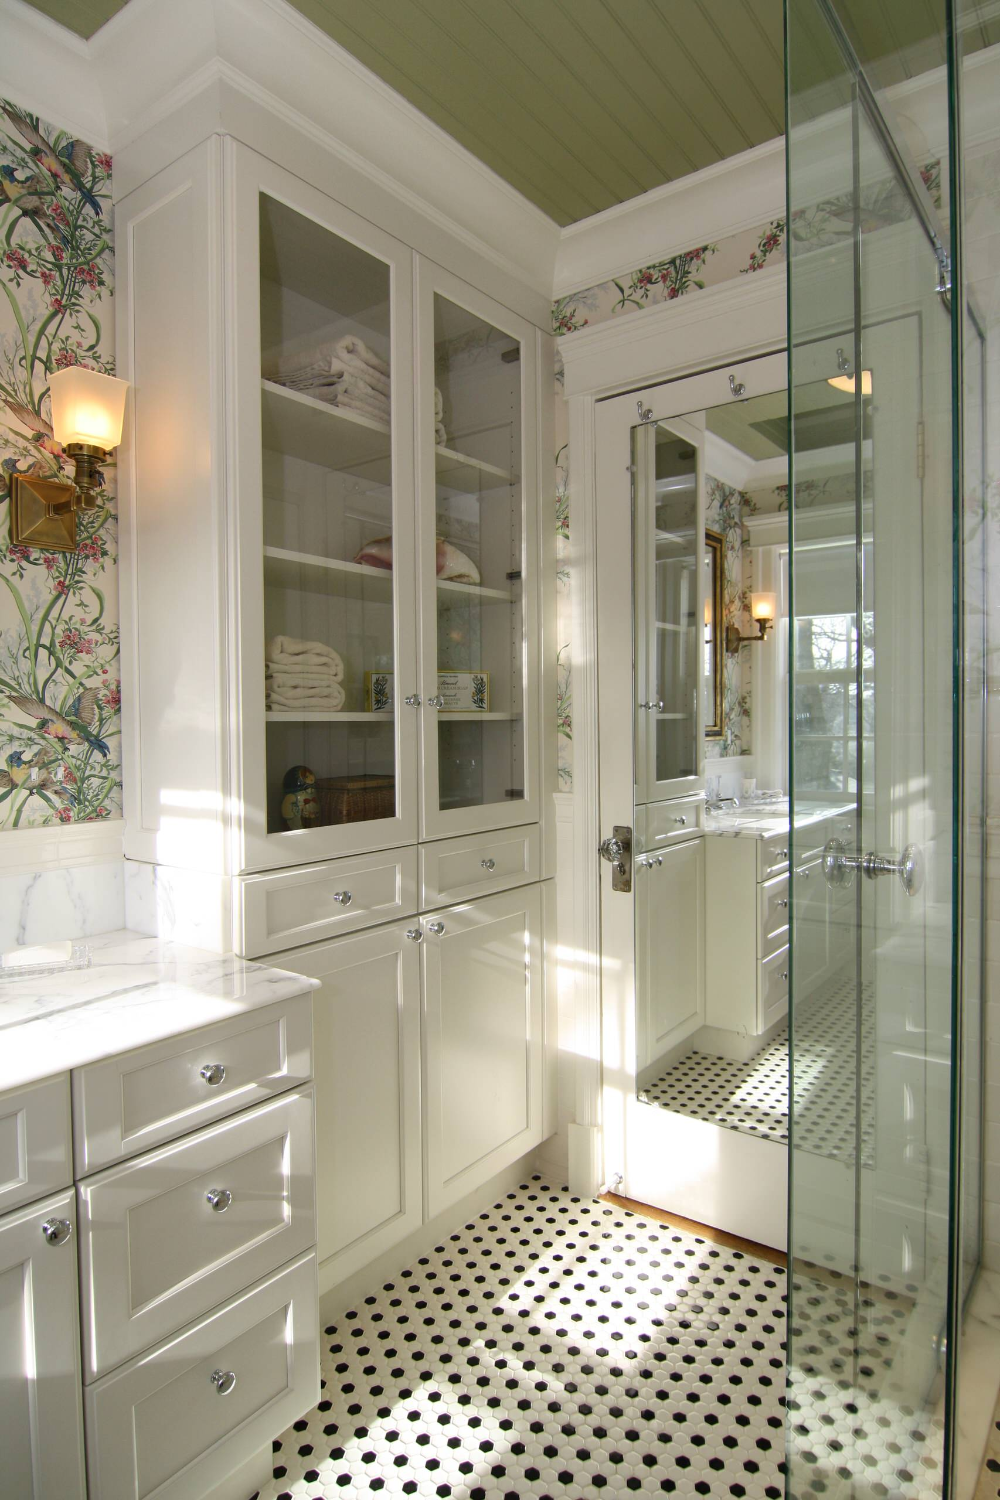 Expert Tips for Choosing the Perfect
Bathroom Linen Cabinet for Your Style and Space